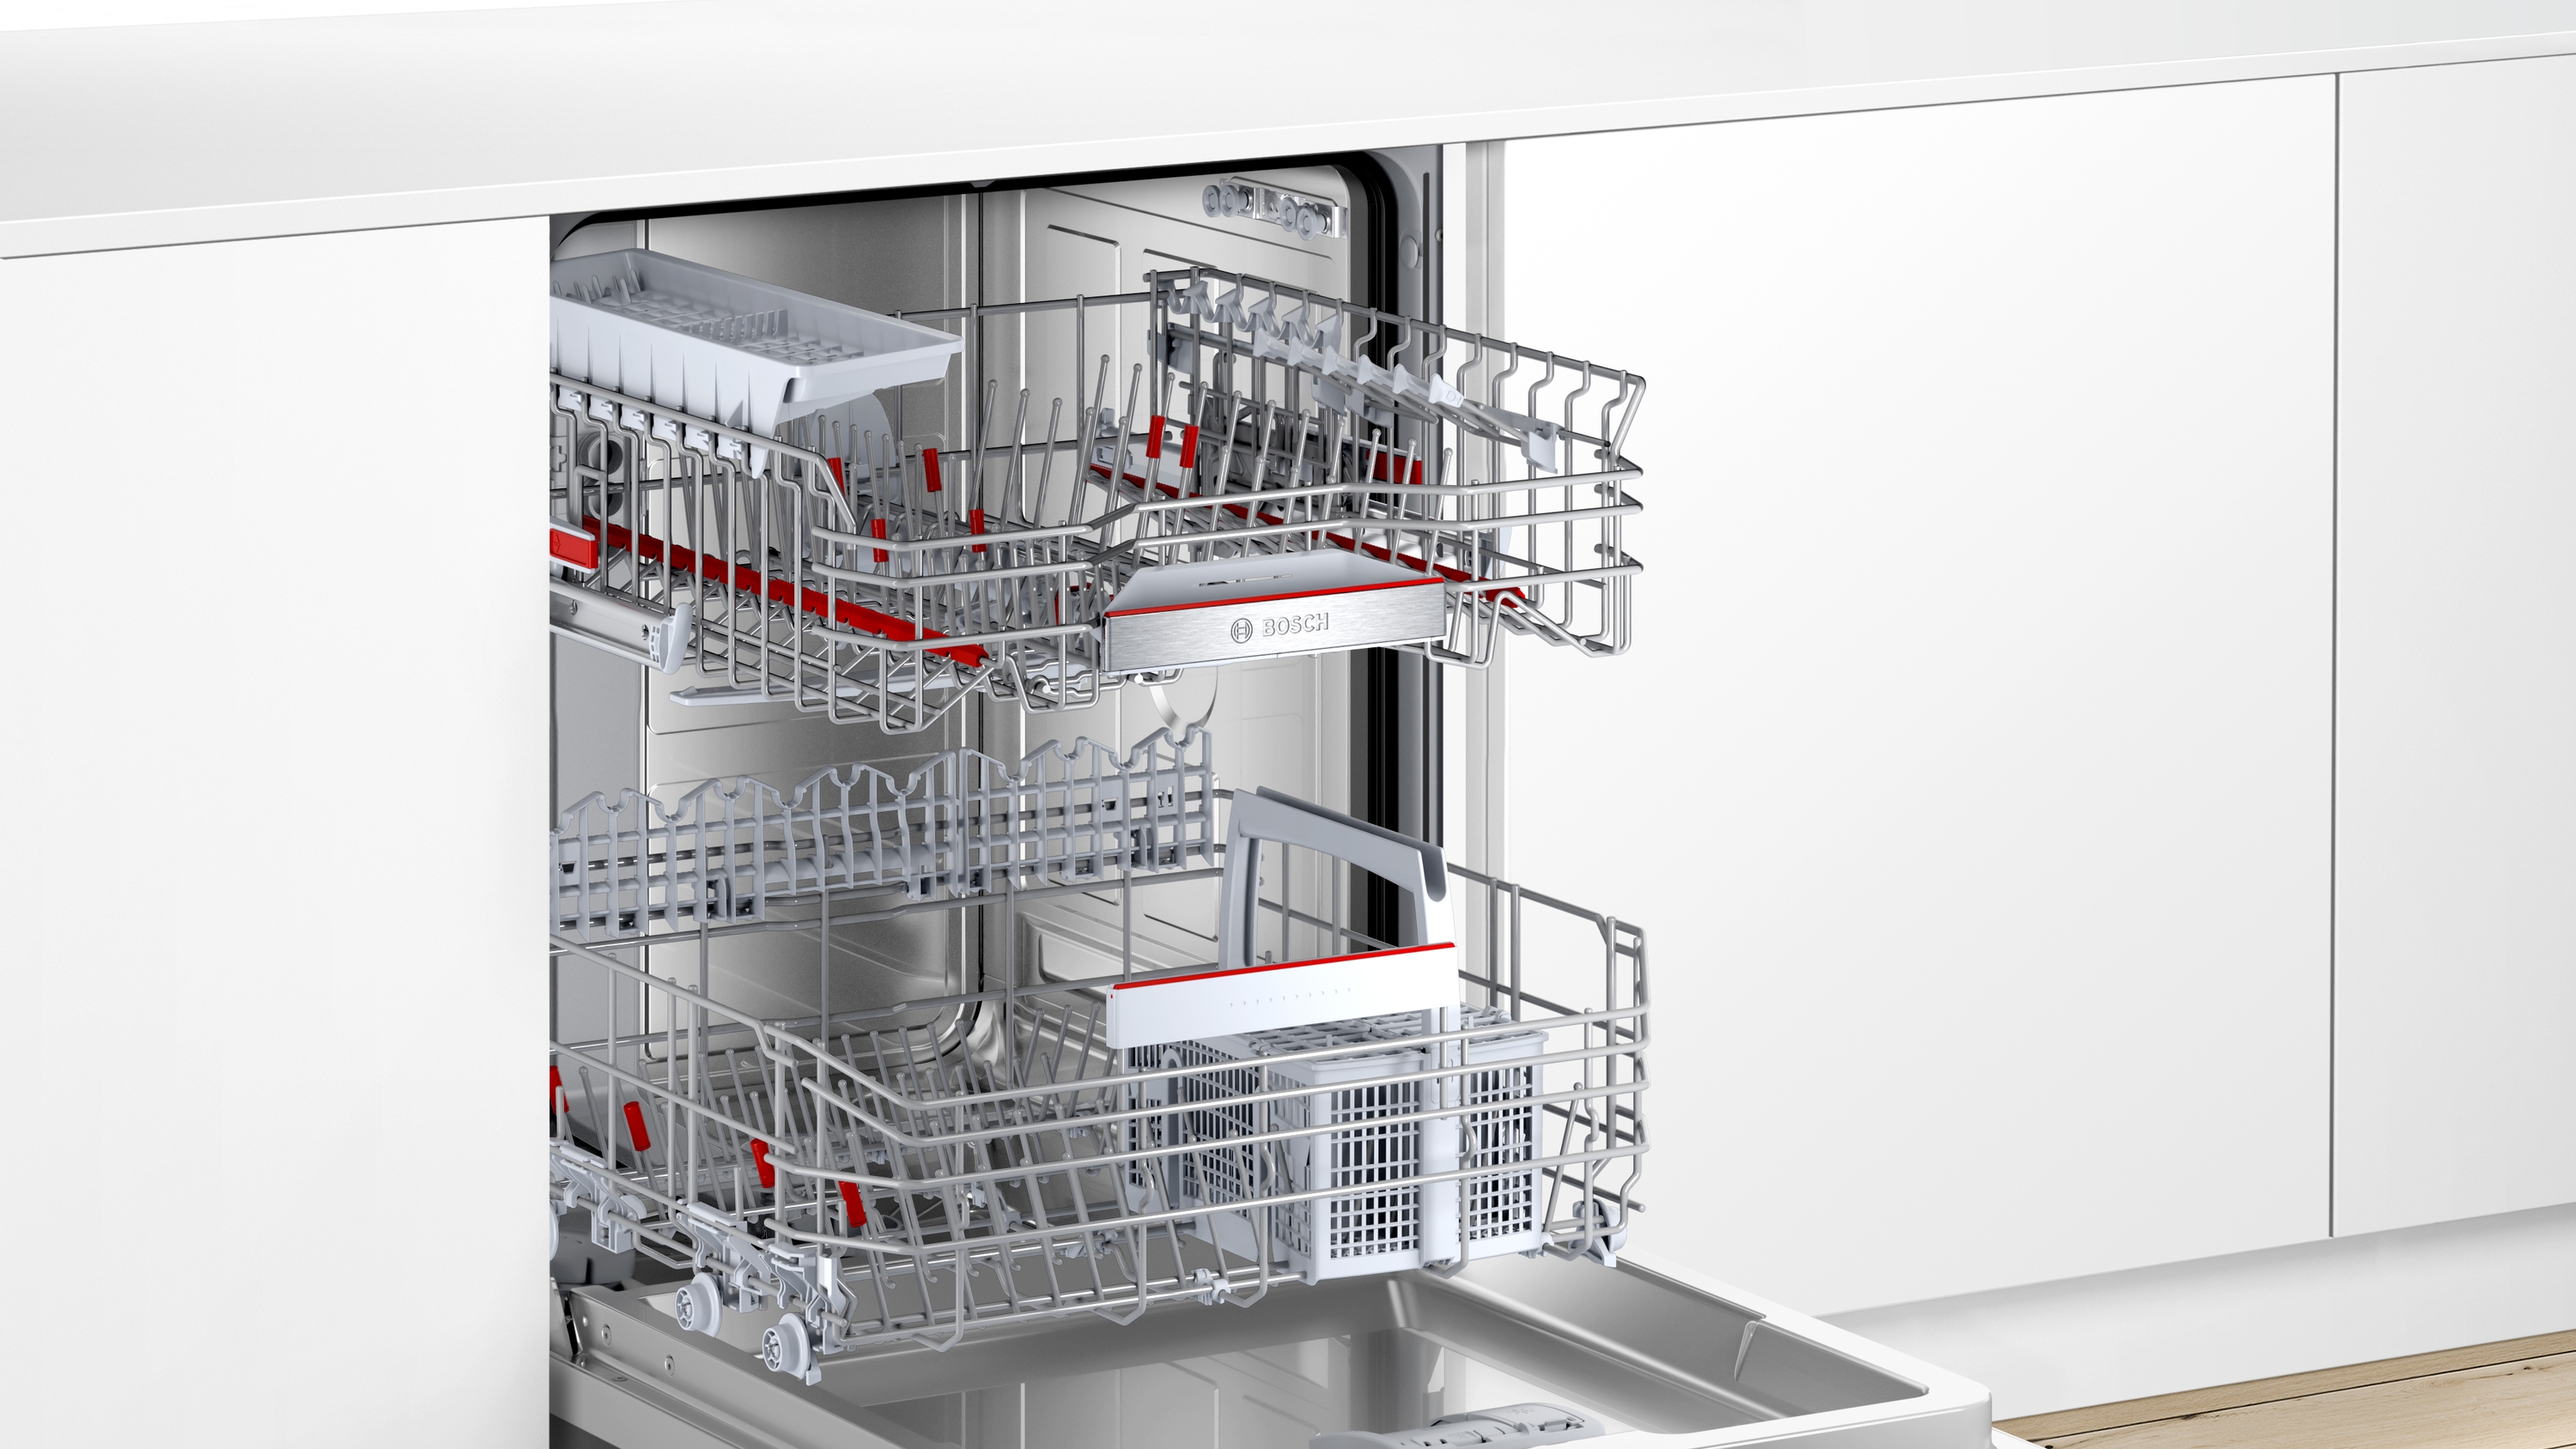 Series 6, fully-integrated dishwasher, 60 cm, XXL, SBT6EB800E